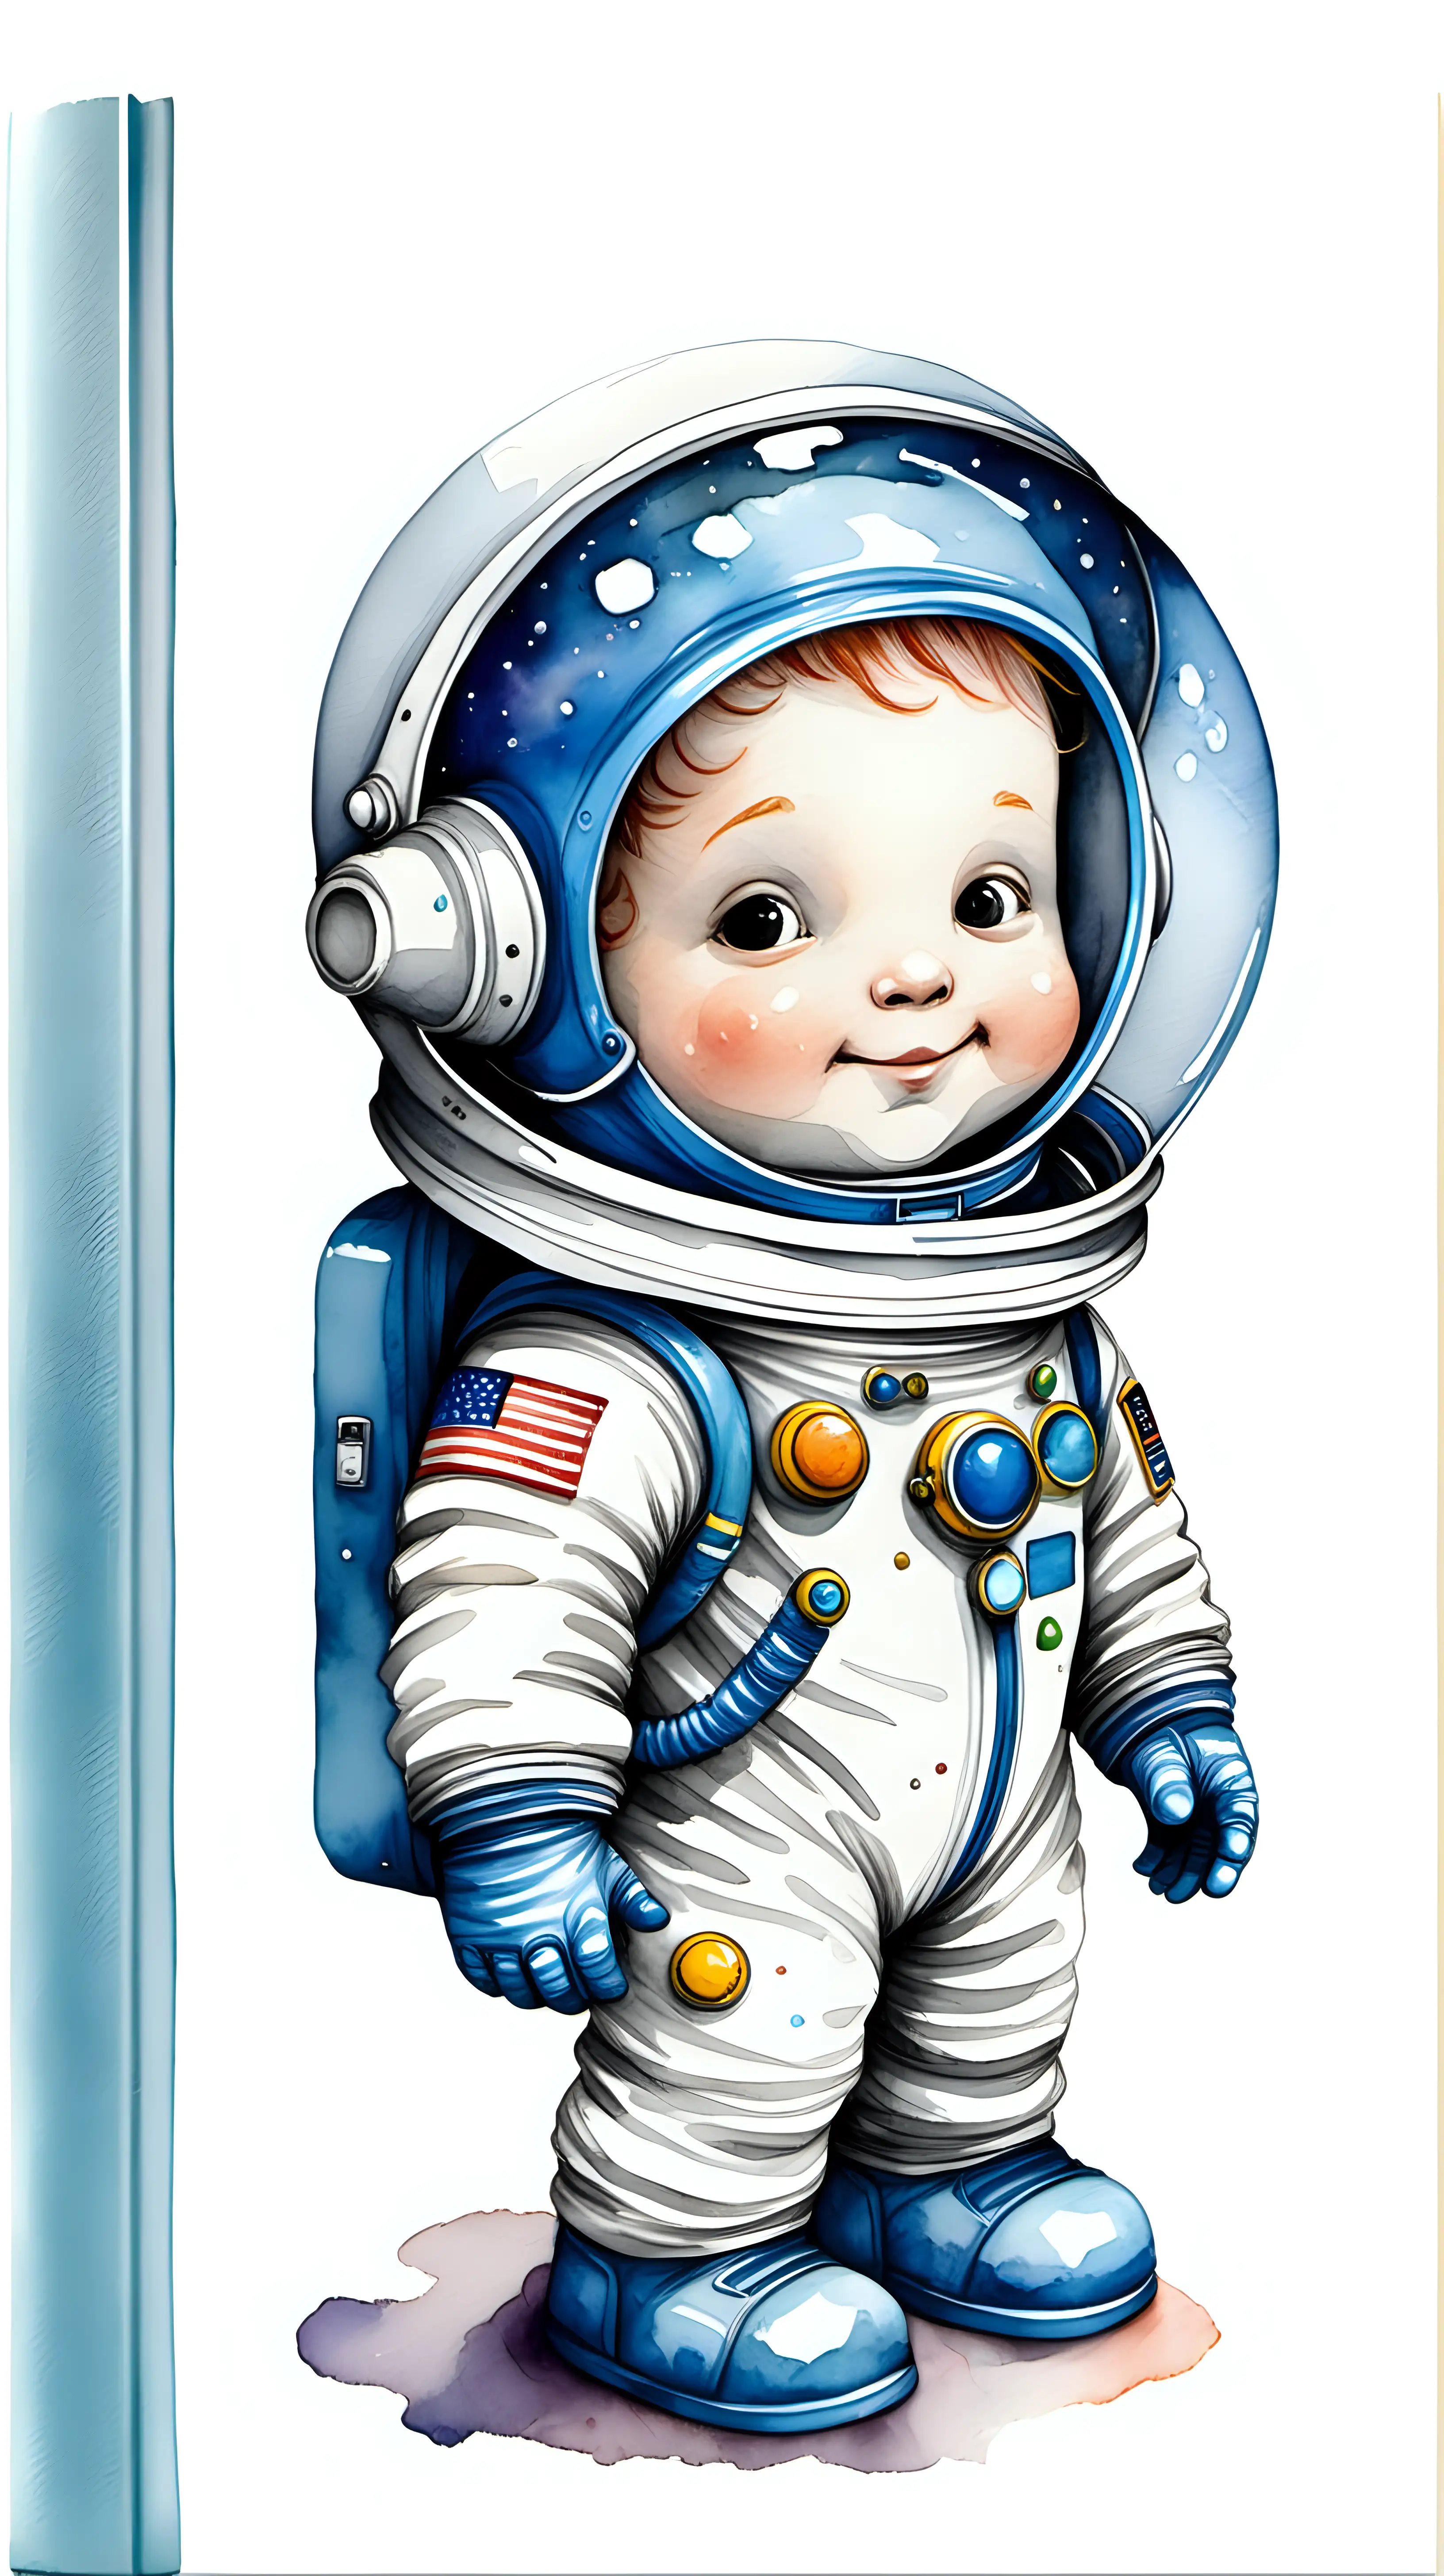 Cute astronaut, orlight grey space suit, face not visible behind his blue glass space helmet, watercolour story book illustration on a solid white background